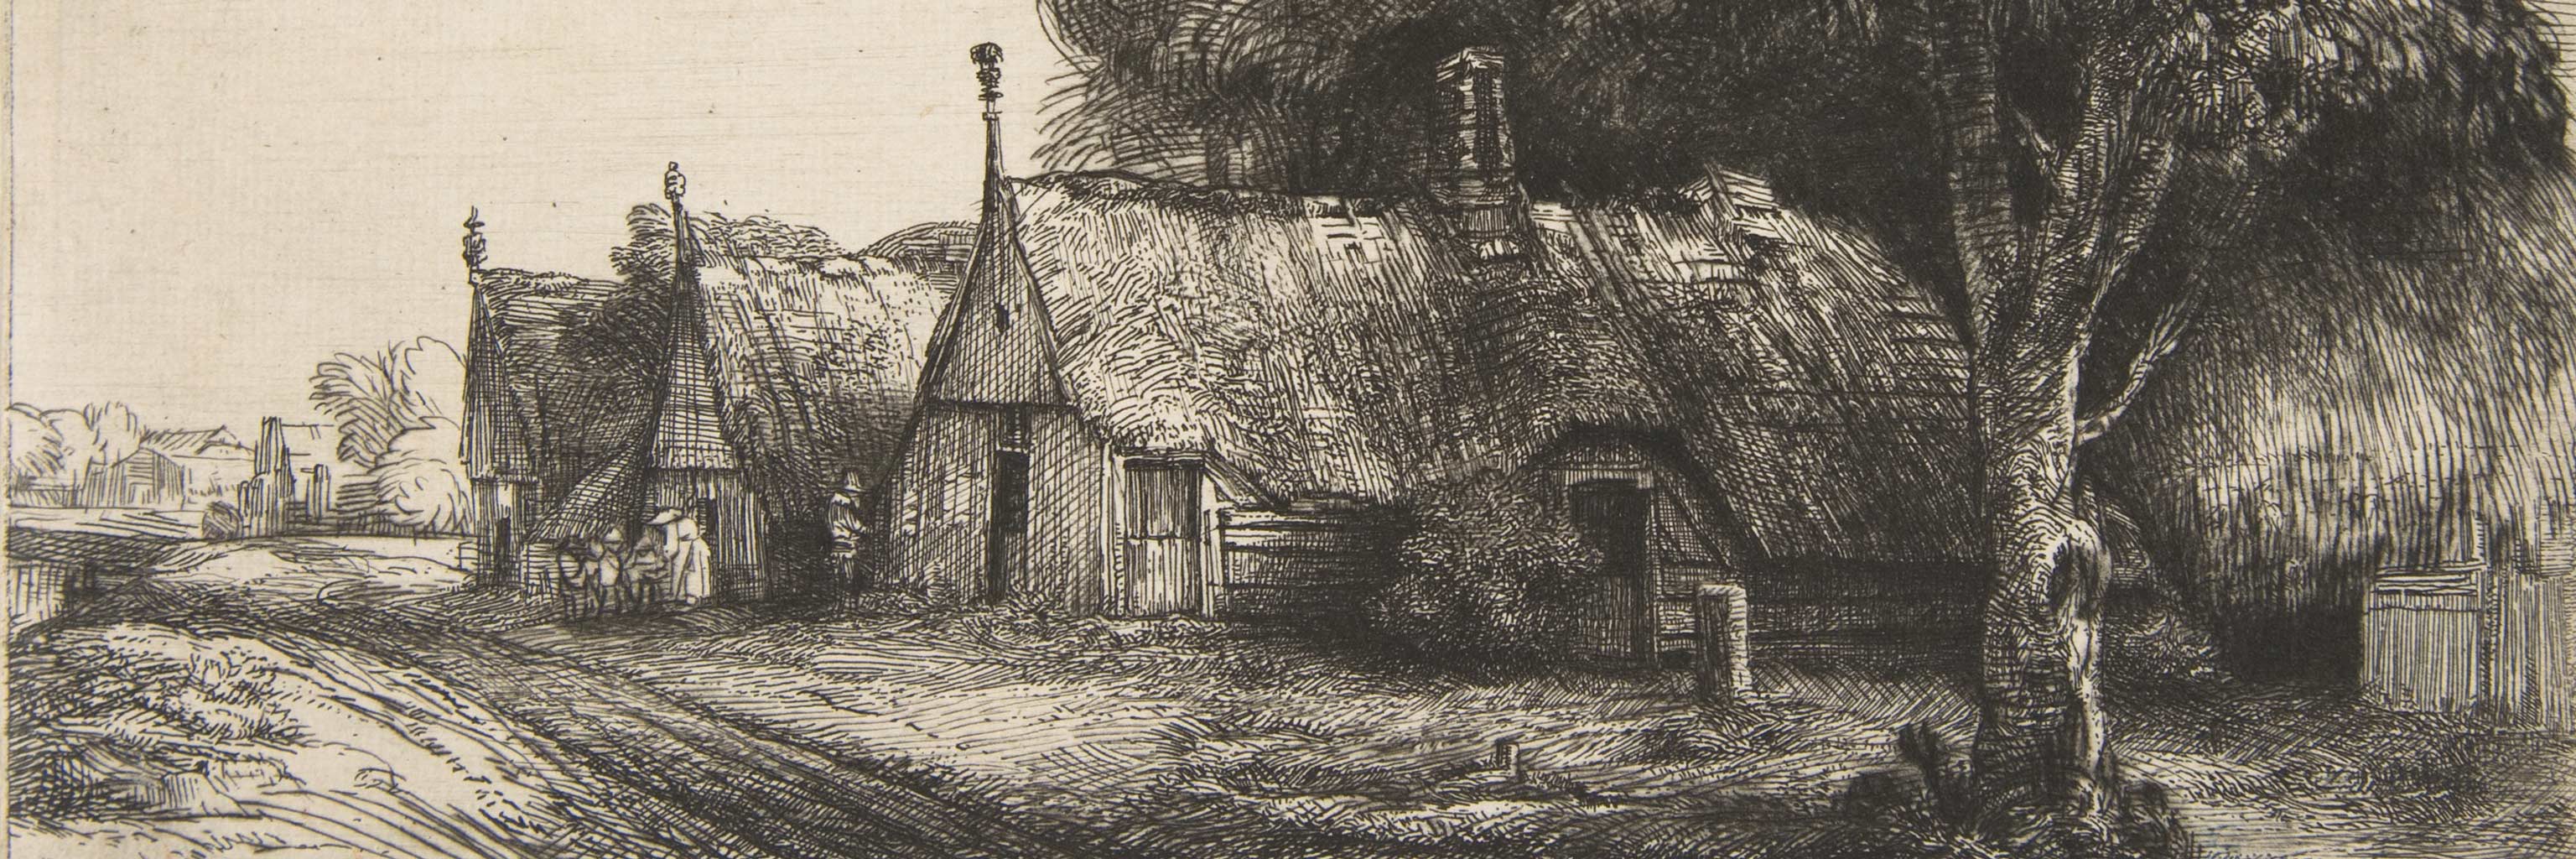 Black and white drawing of wooden housing during colonial times.